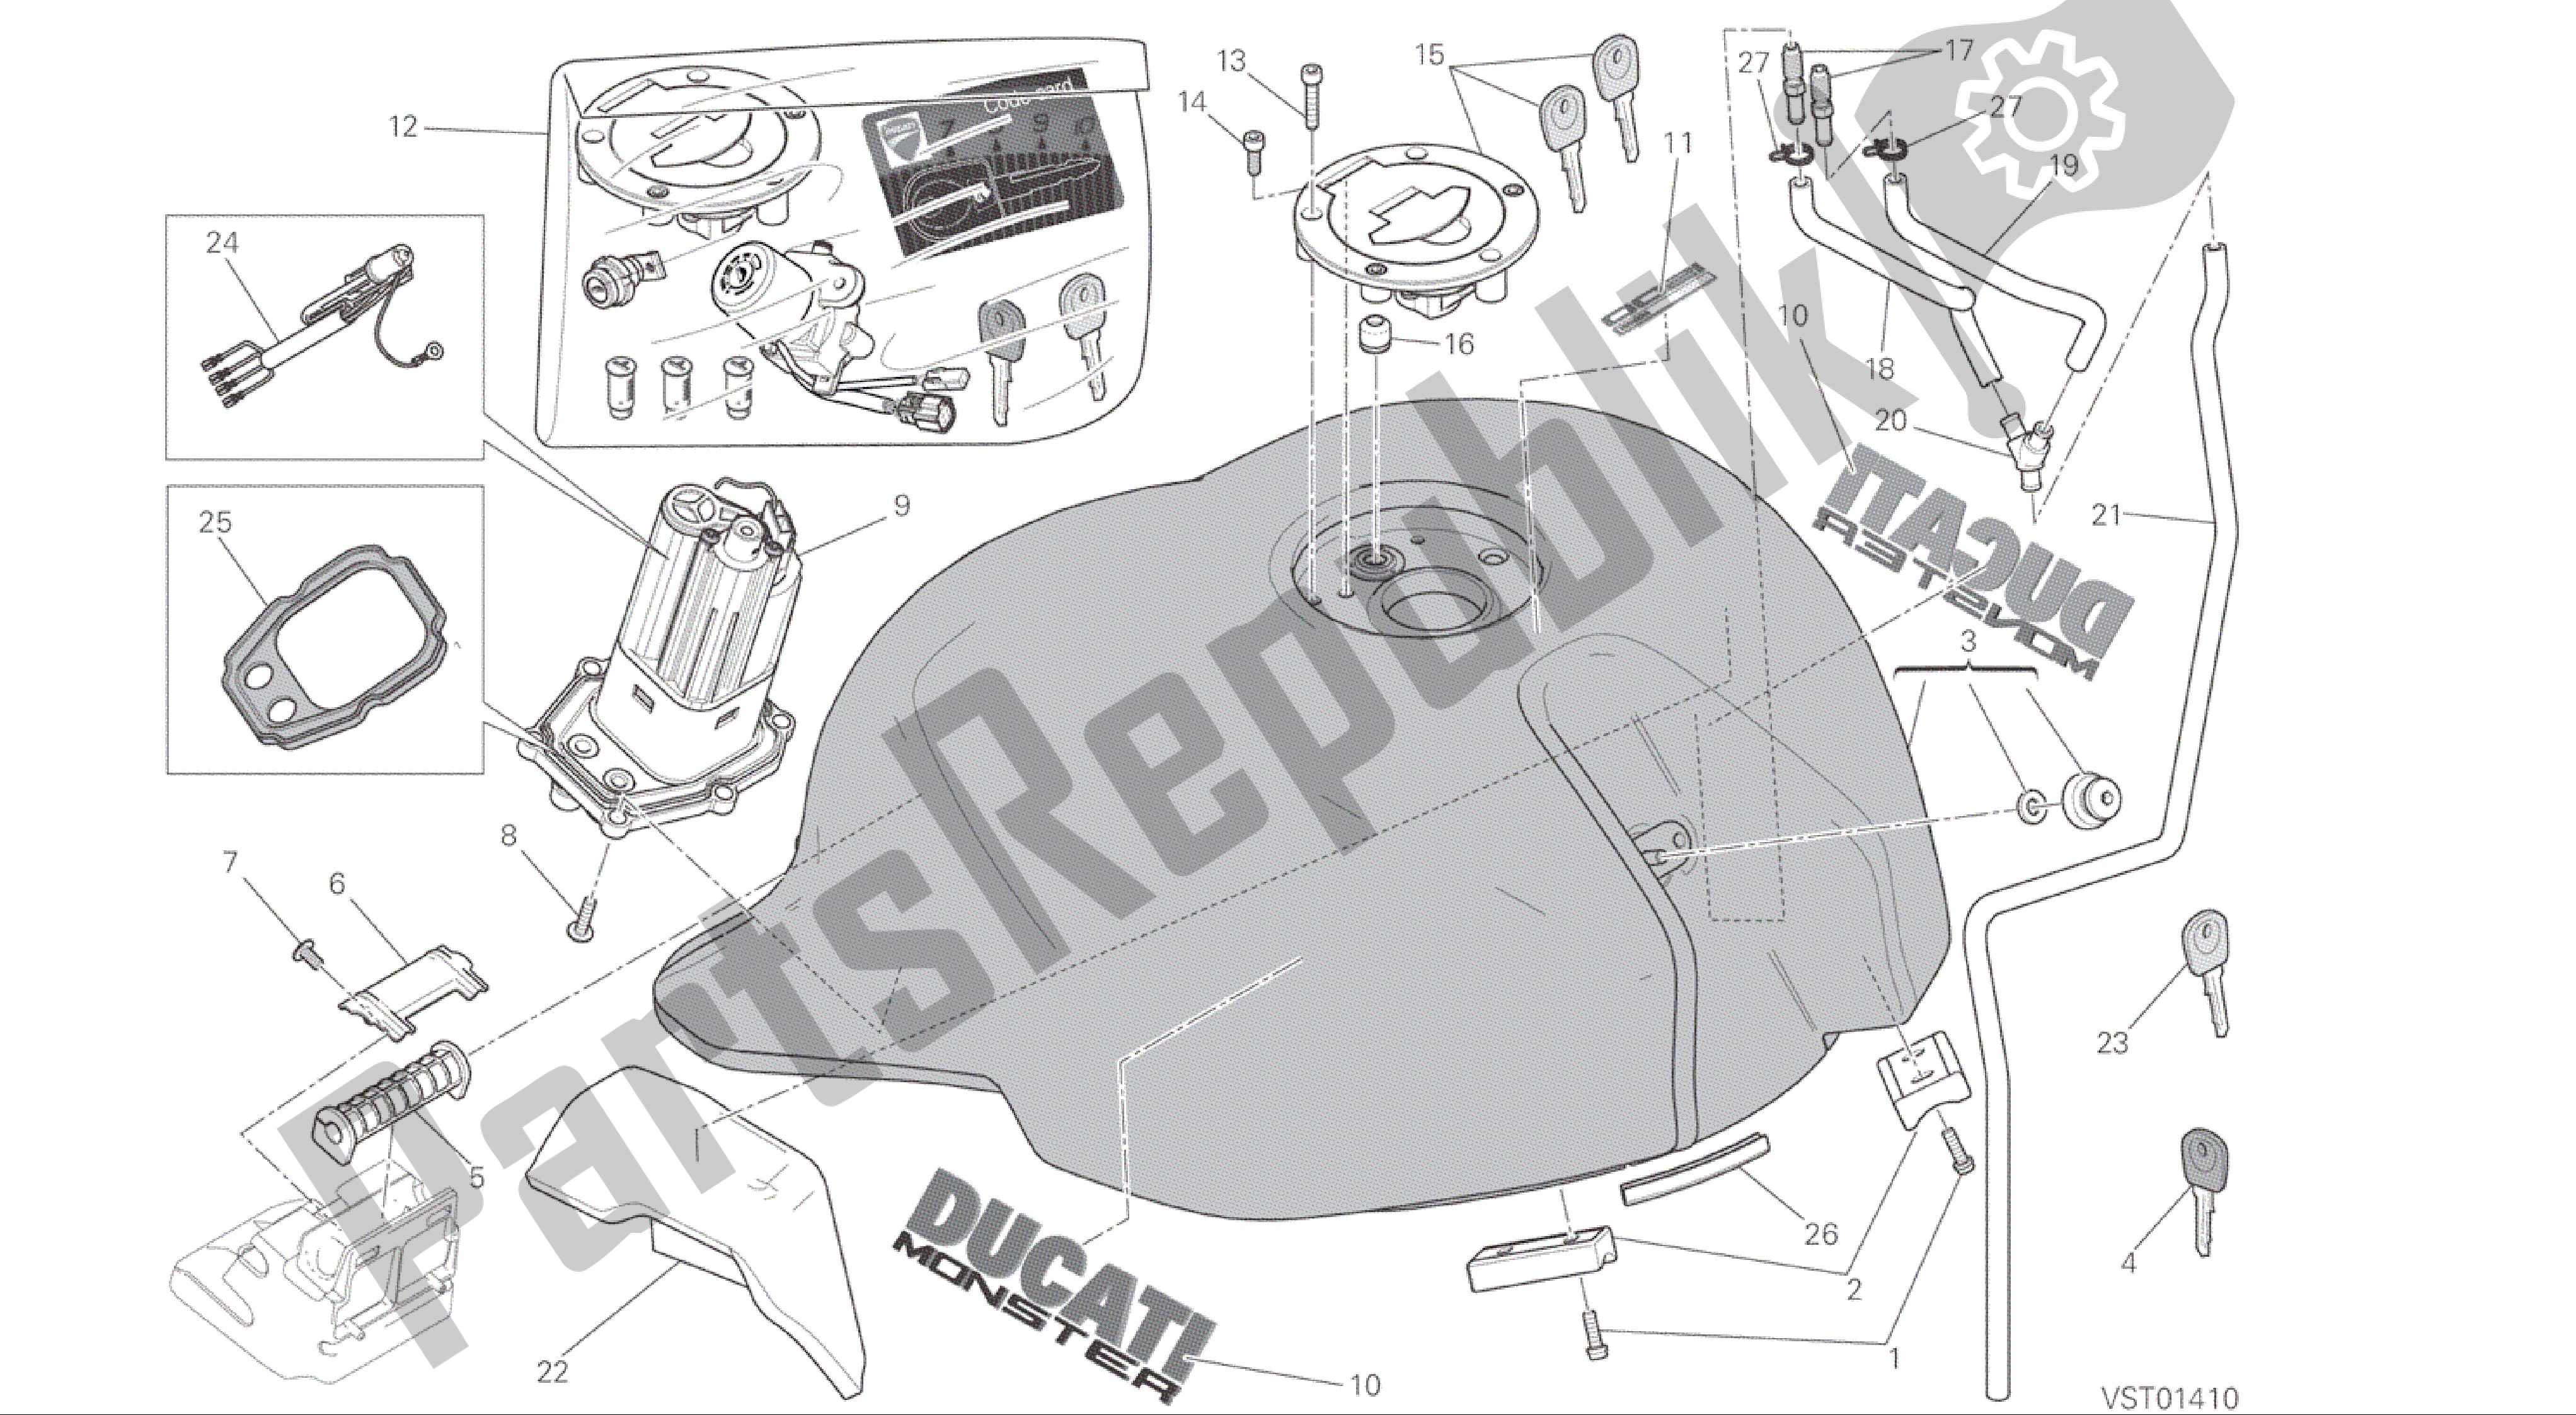 All parts for the Drawing 032 - Fuel Tank [mod:m 1200;xst:aus,bra,eur,fra,jap]group Frame of the Ducati Monster 1200 2015